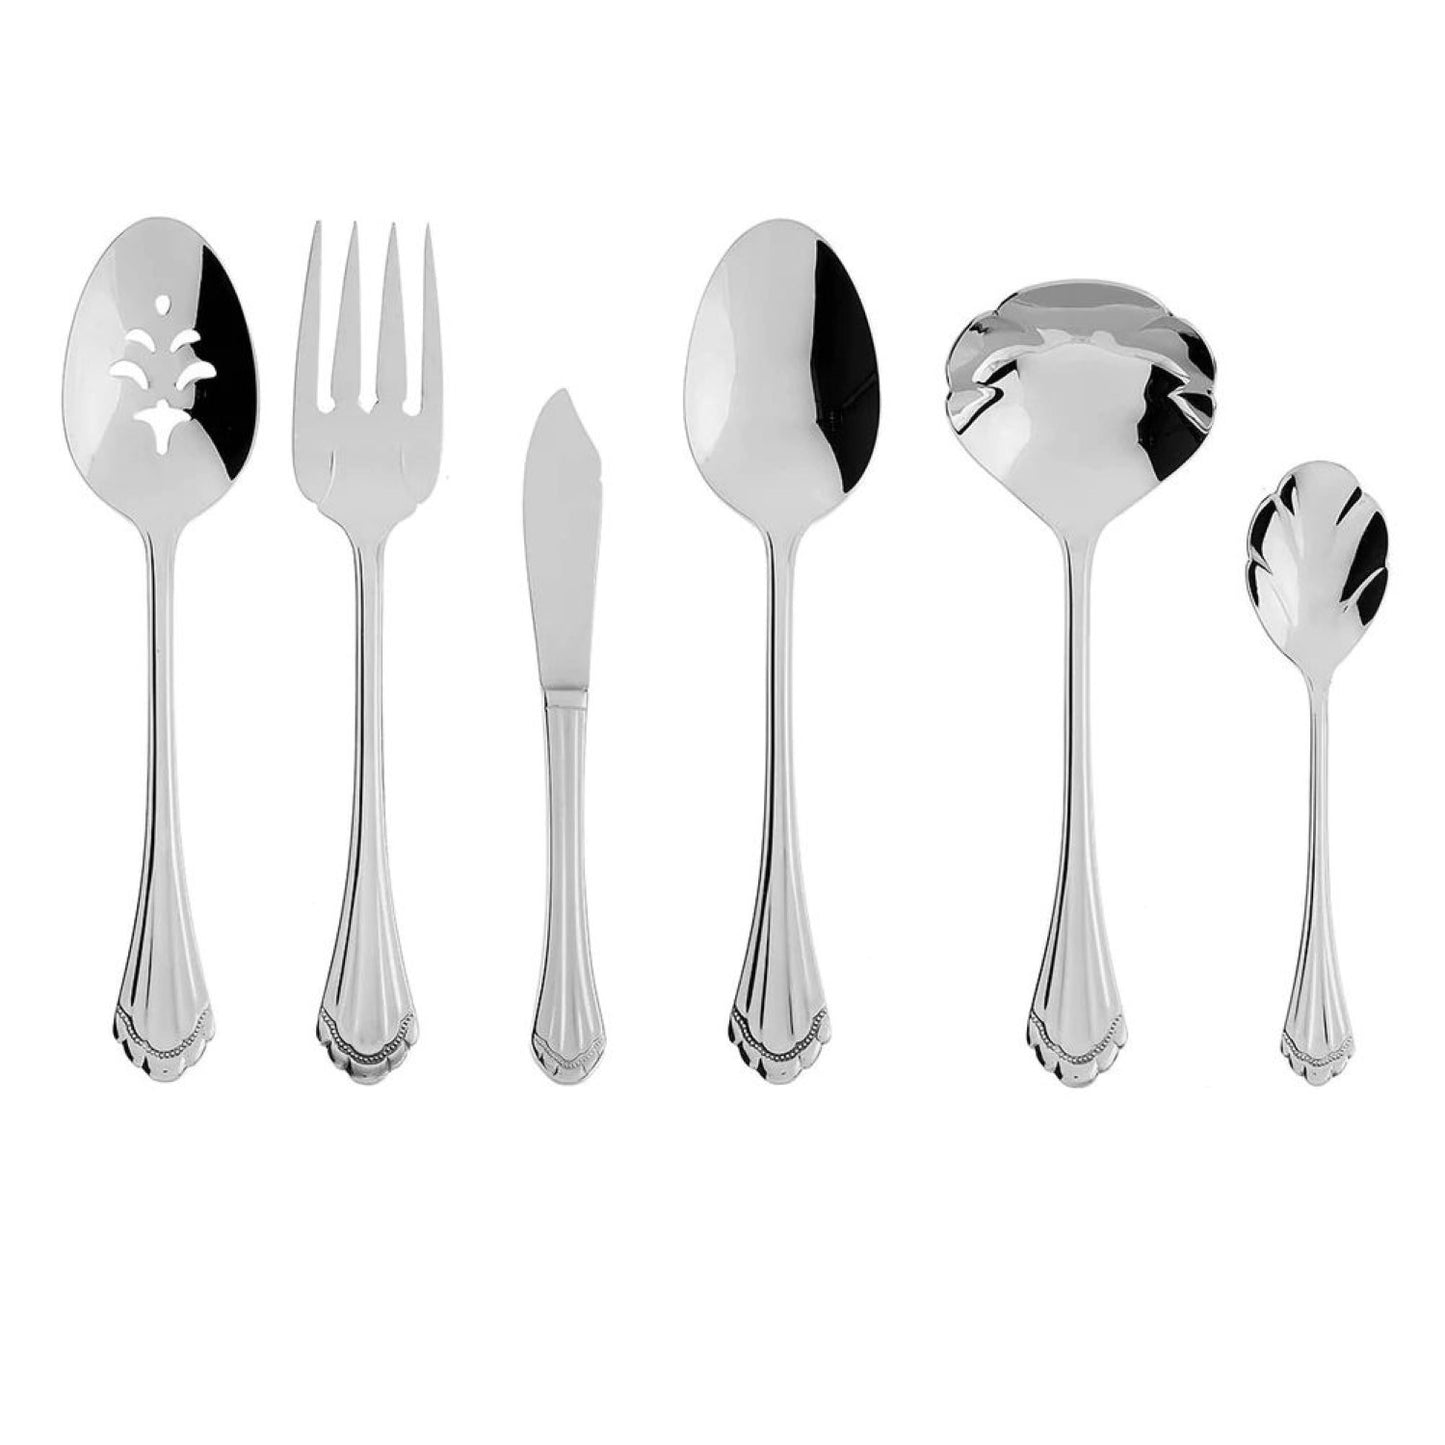 Lenox Oneida Marquette 6-Piece Serving Set, Stainless